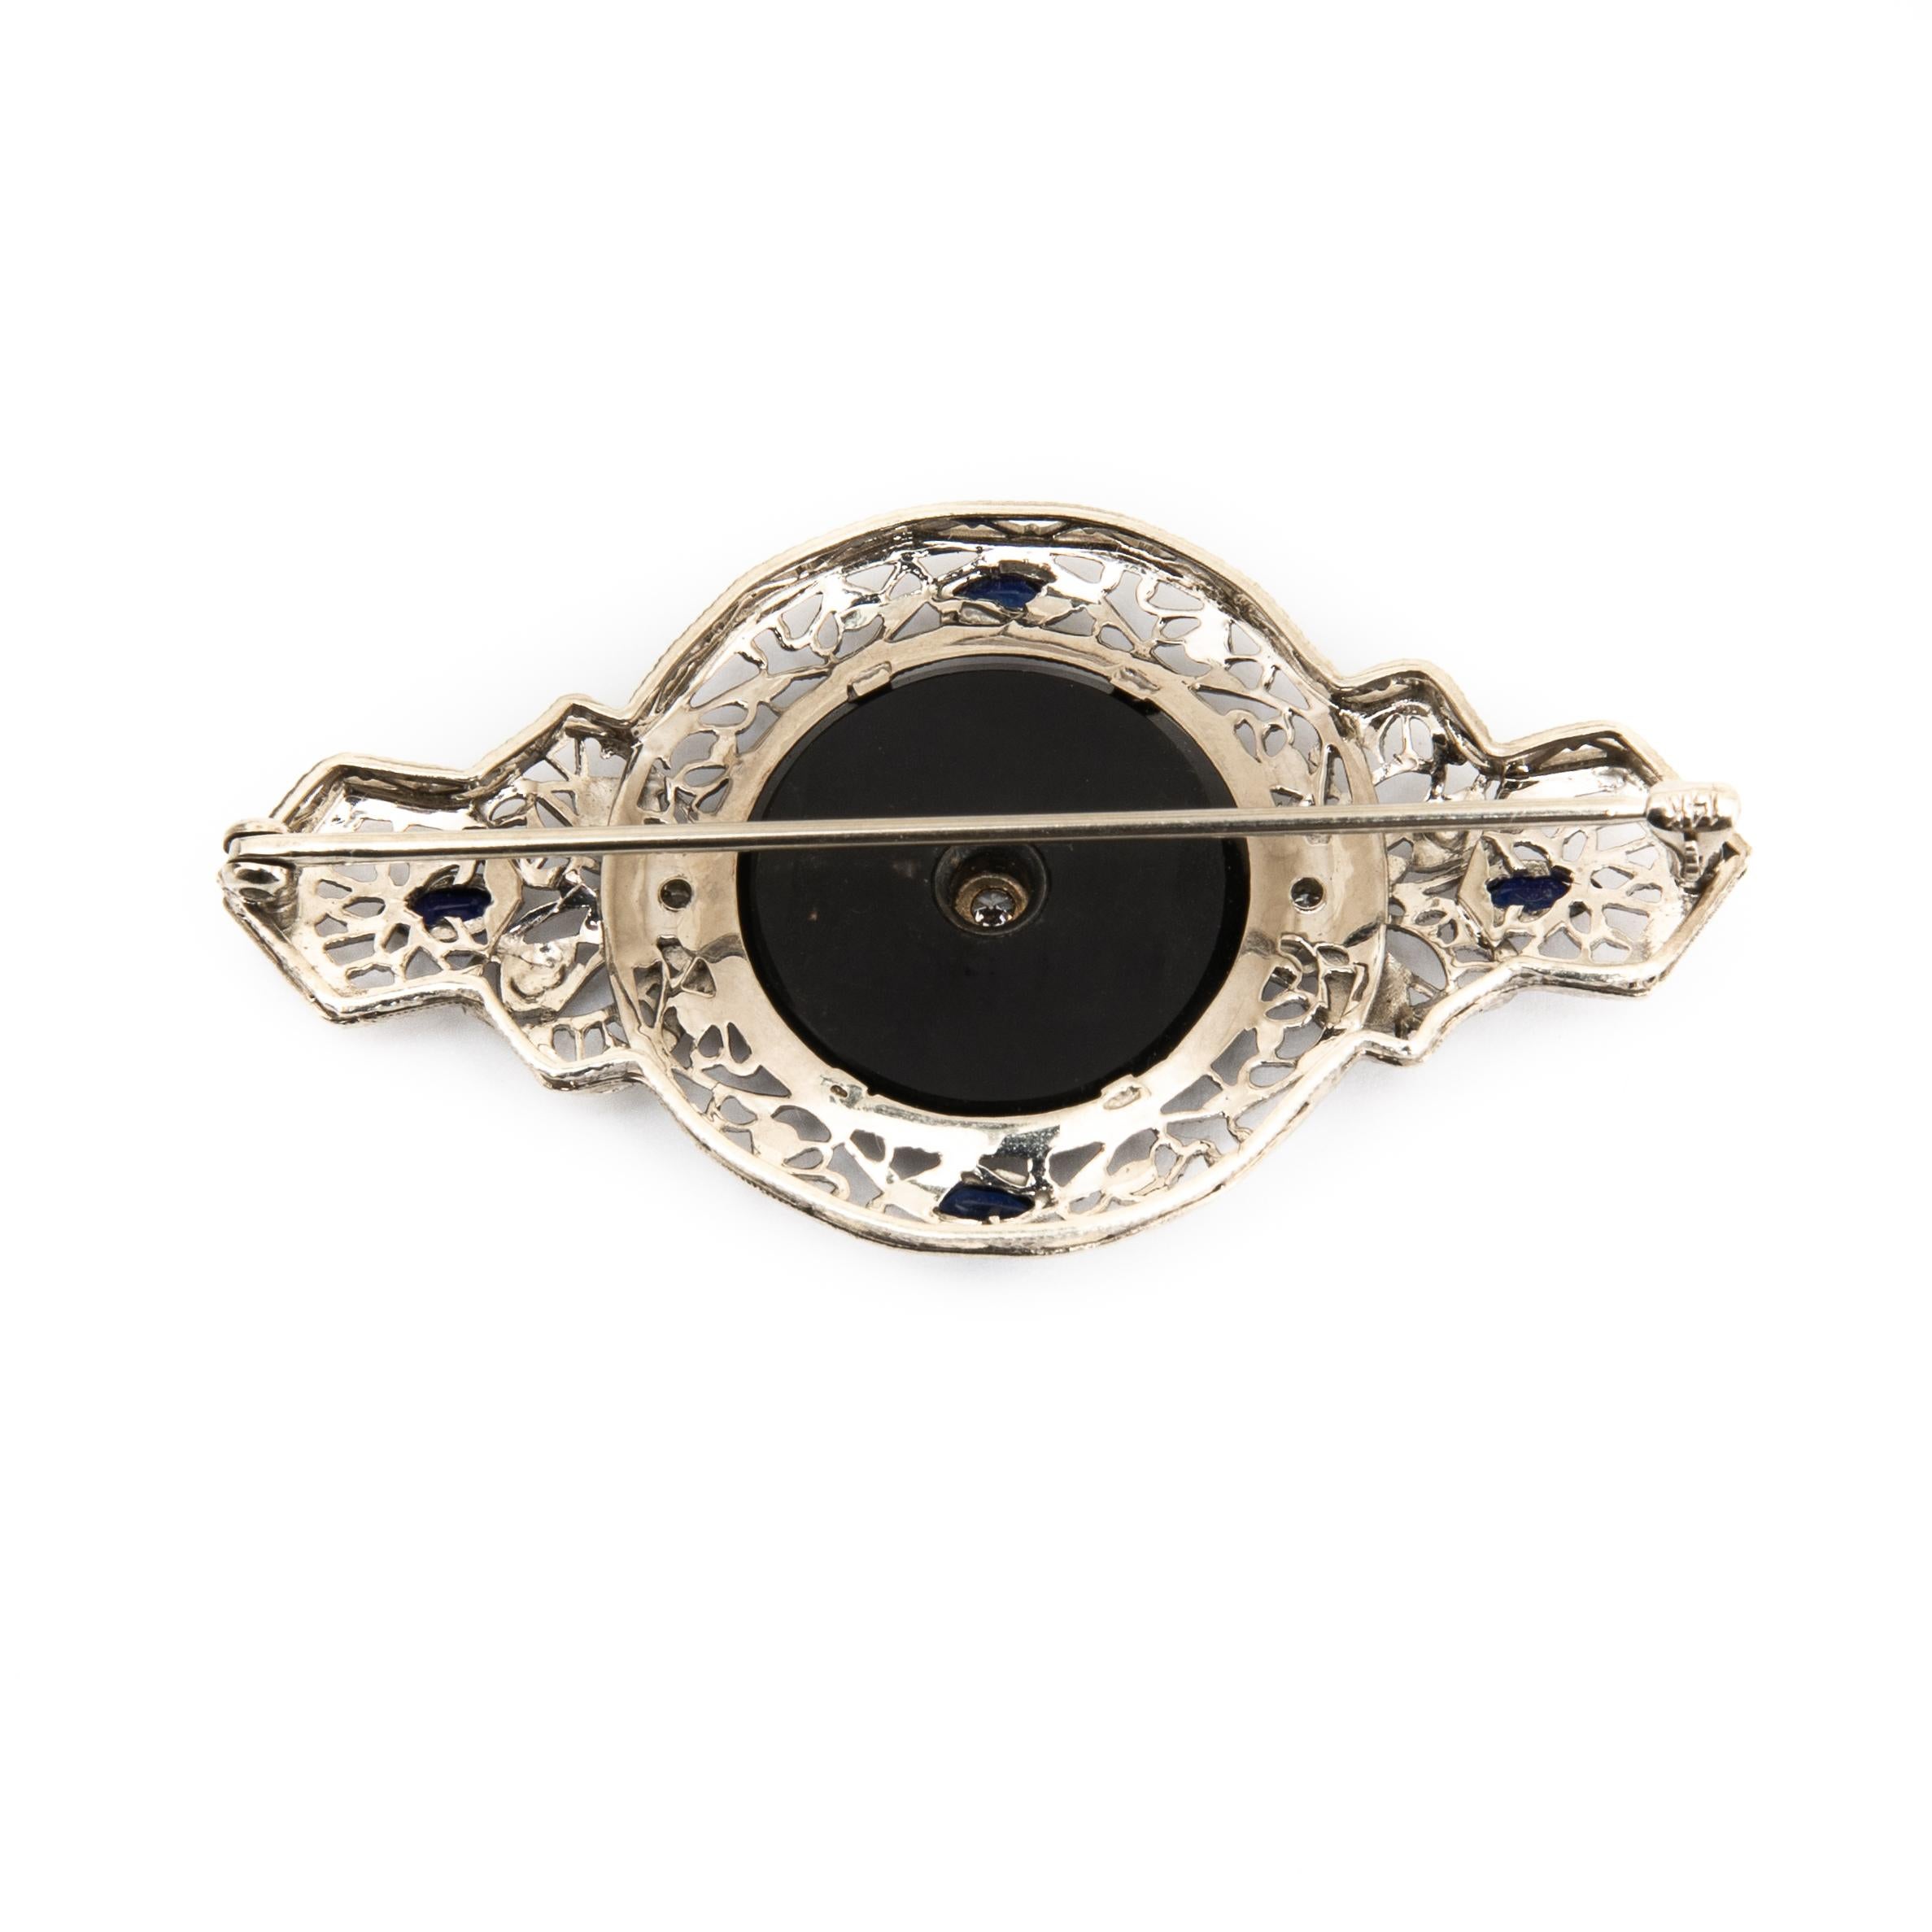 Offered is An Art Deco 14K white gold black onyx, diamond and synthetic blue sapphire brooch. This brooch features a black onyx round tablet, which has an old European cut diamond in the center and a diamond accent on each side. The border of the